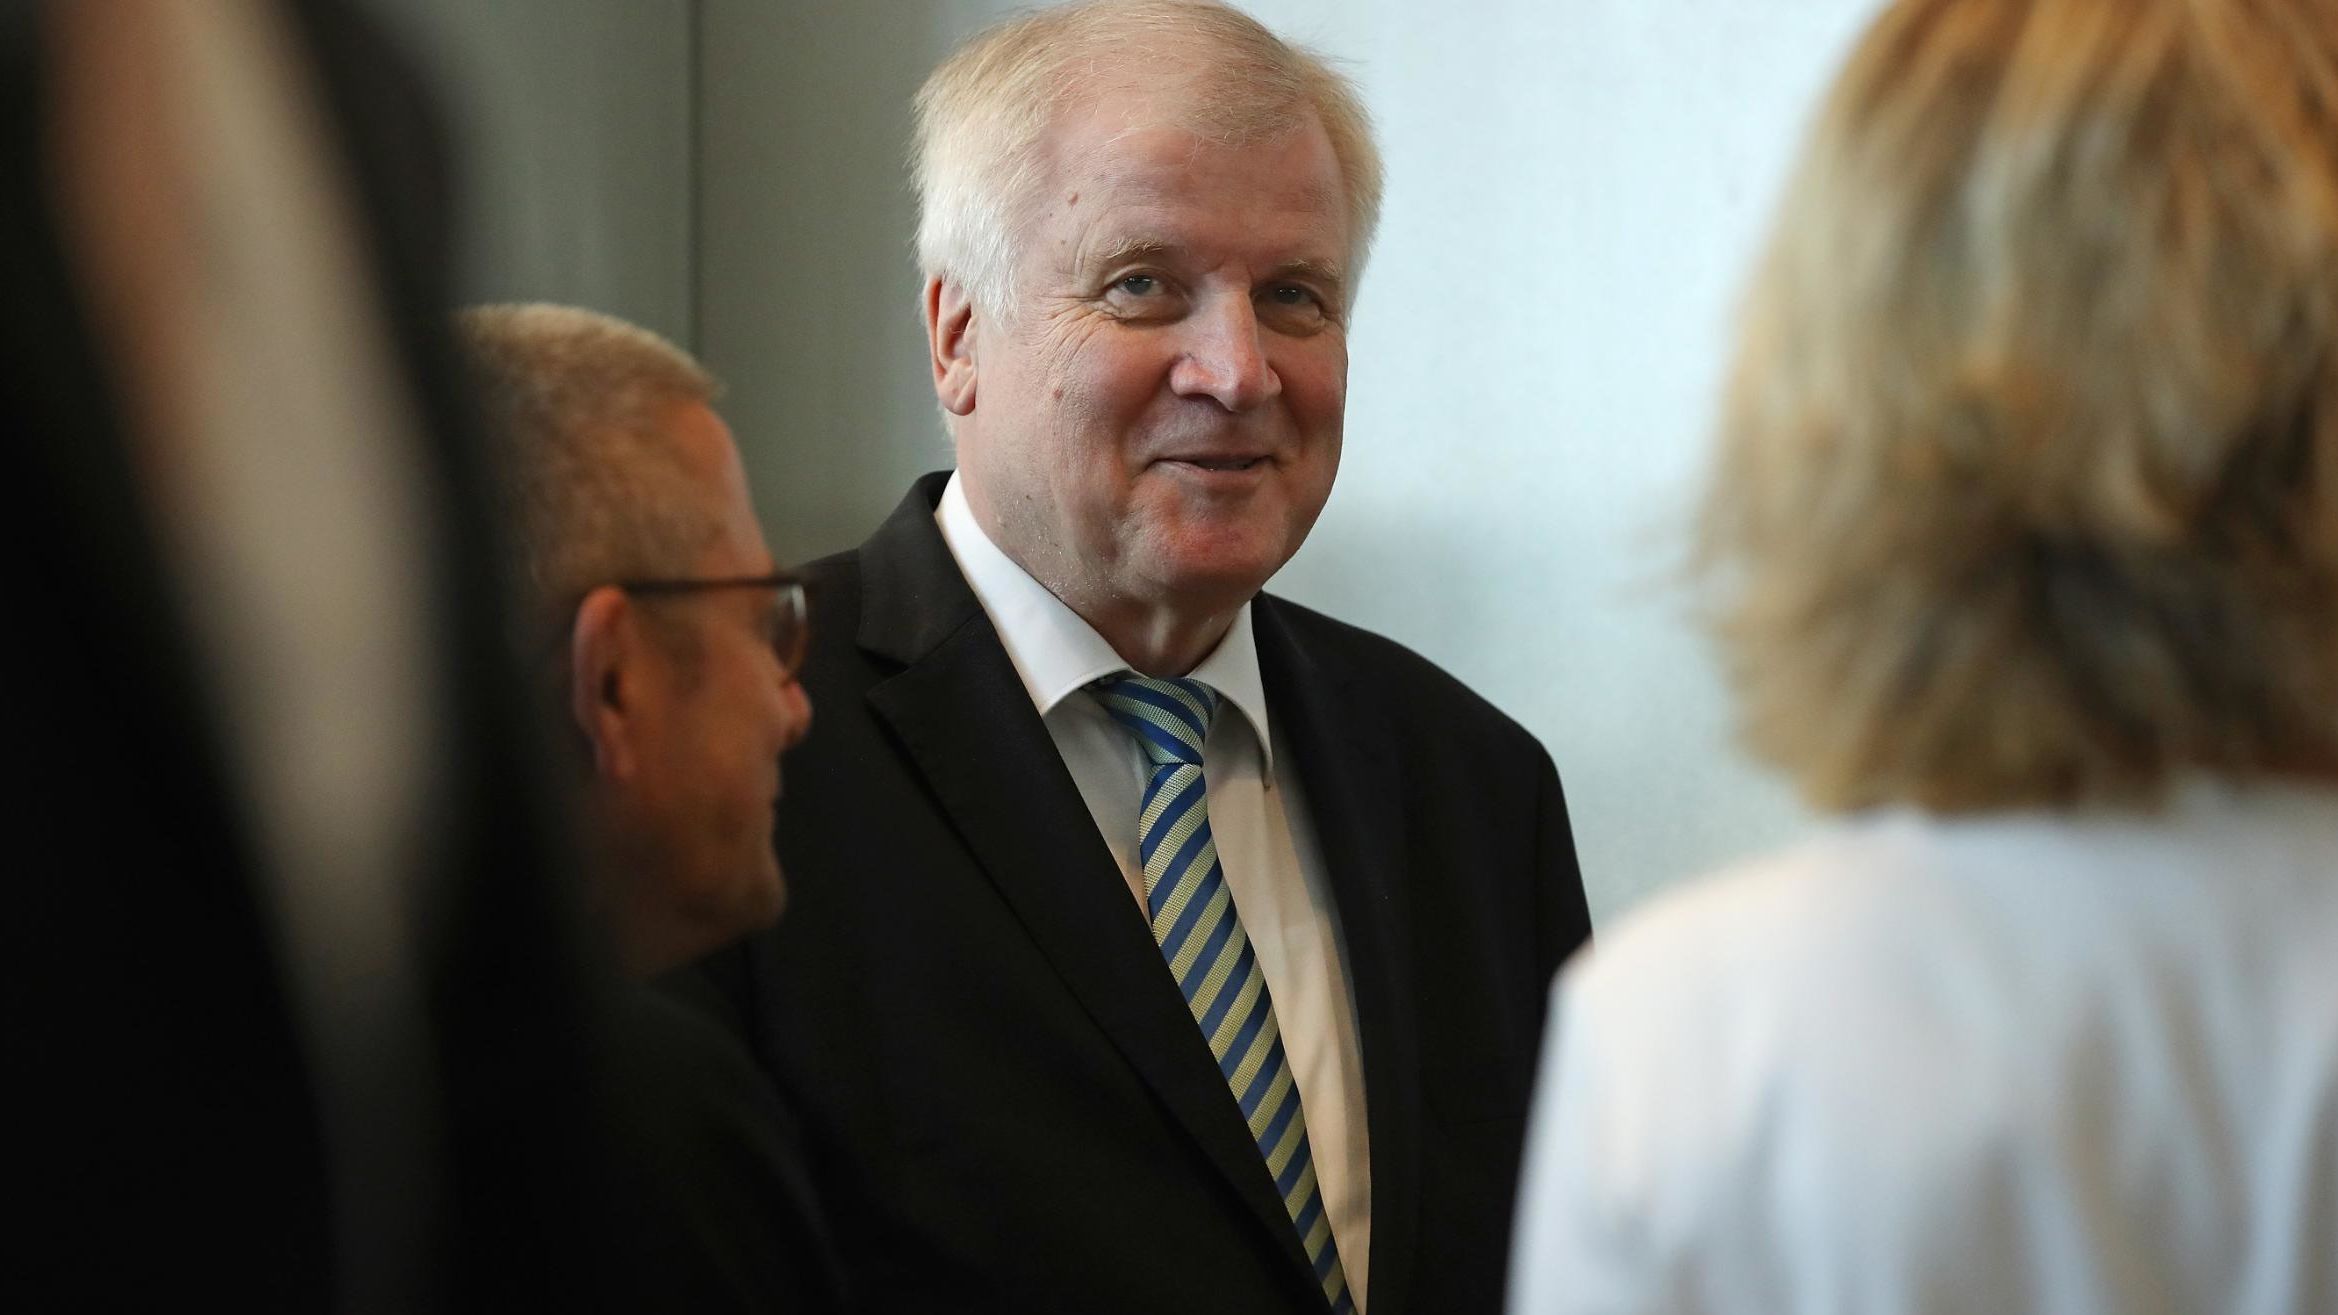 Seehofer is proposing a controversial "migration master plan."